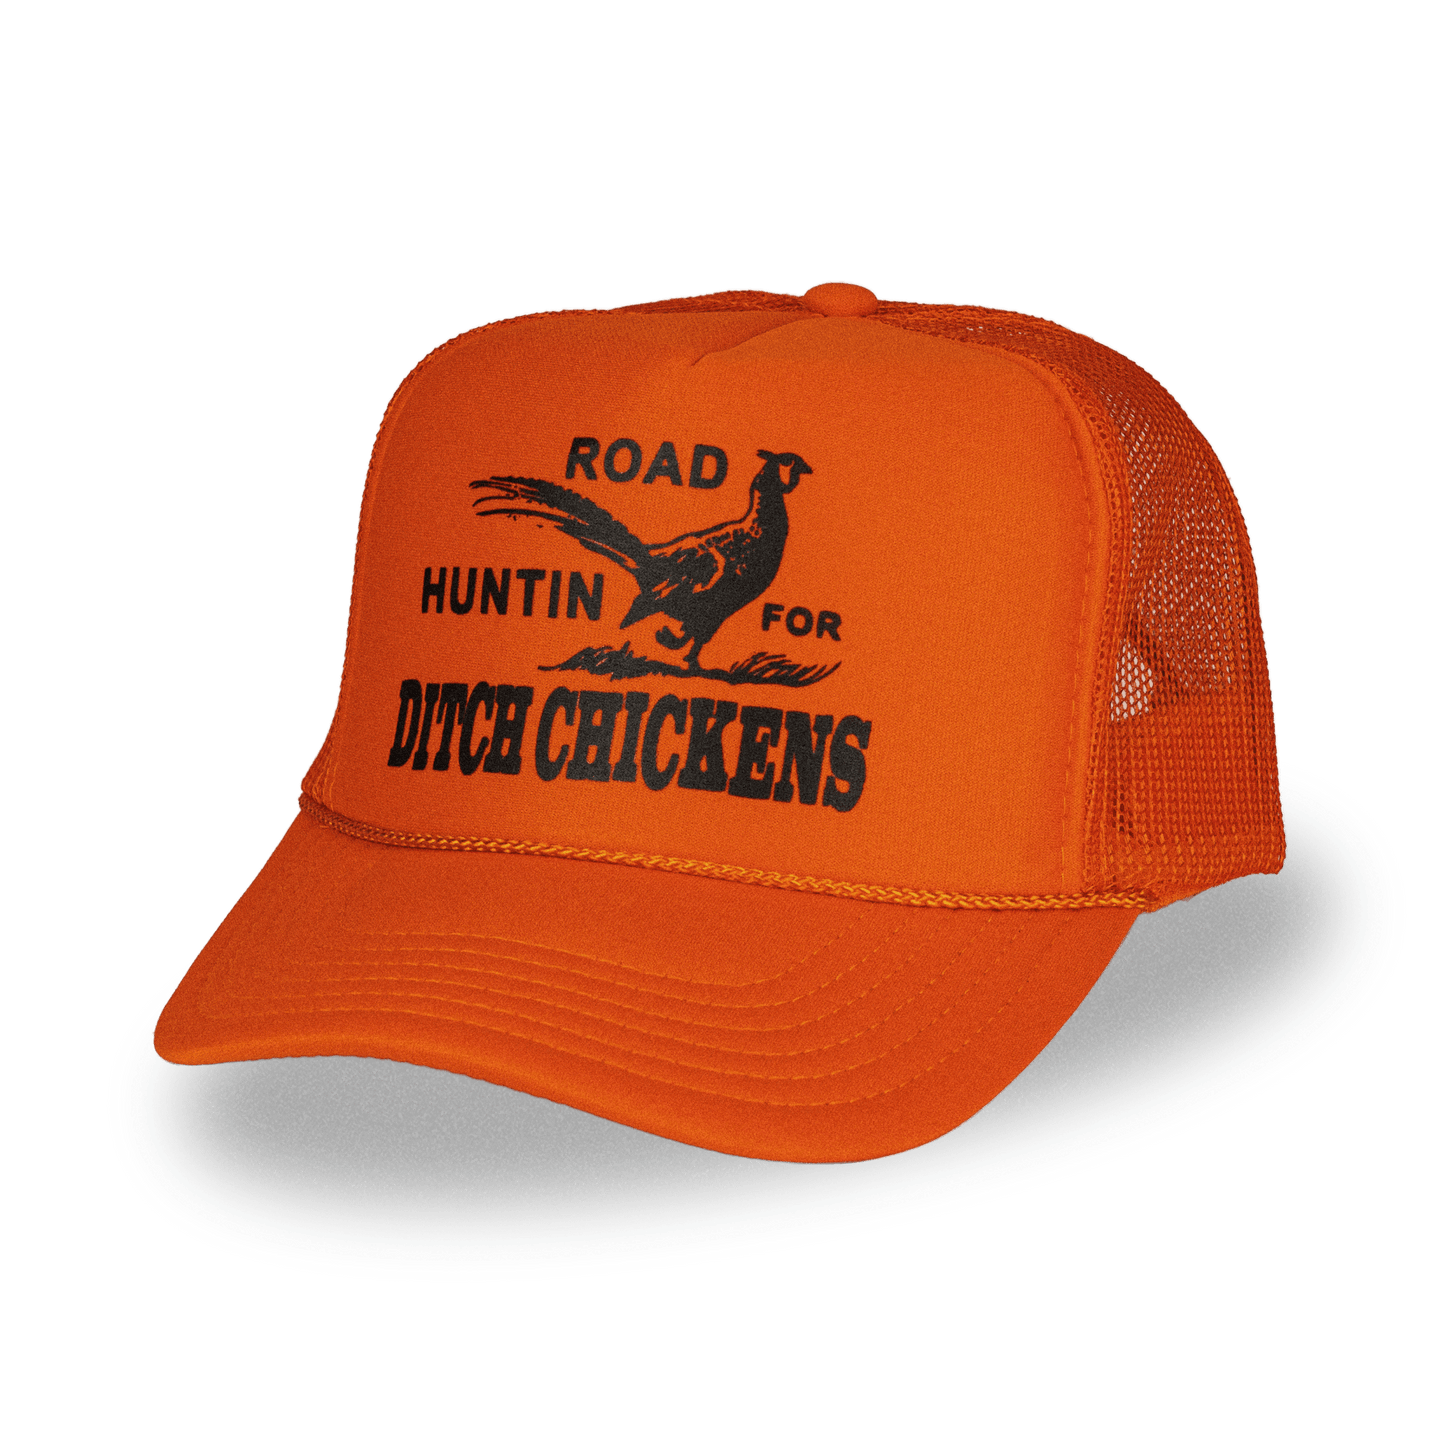 Ditch Chickens Hat – You Betcha